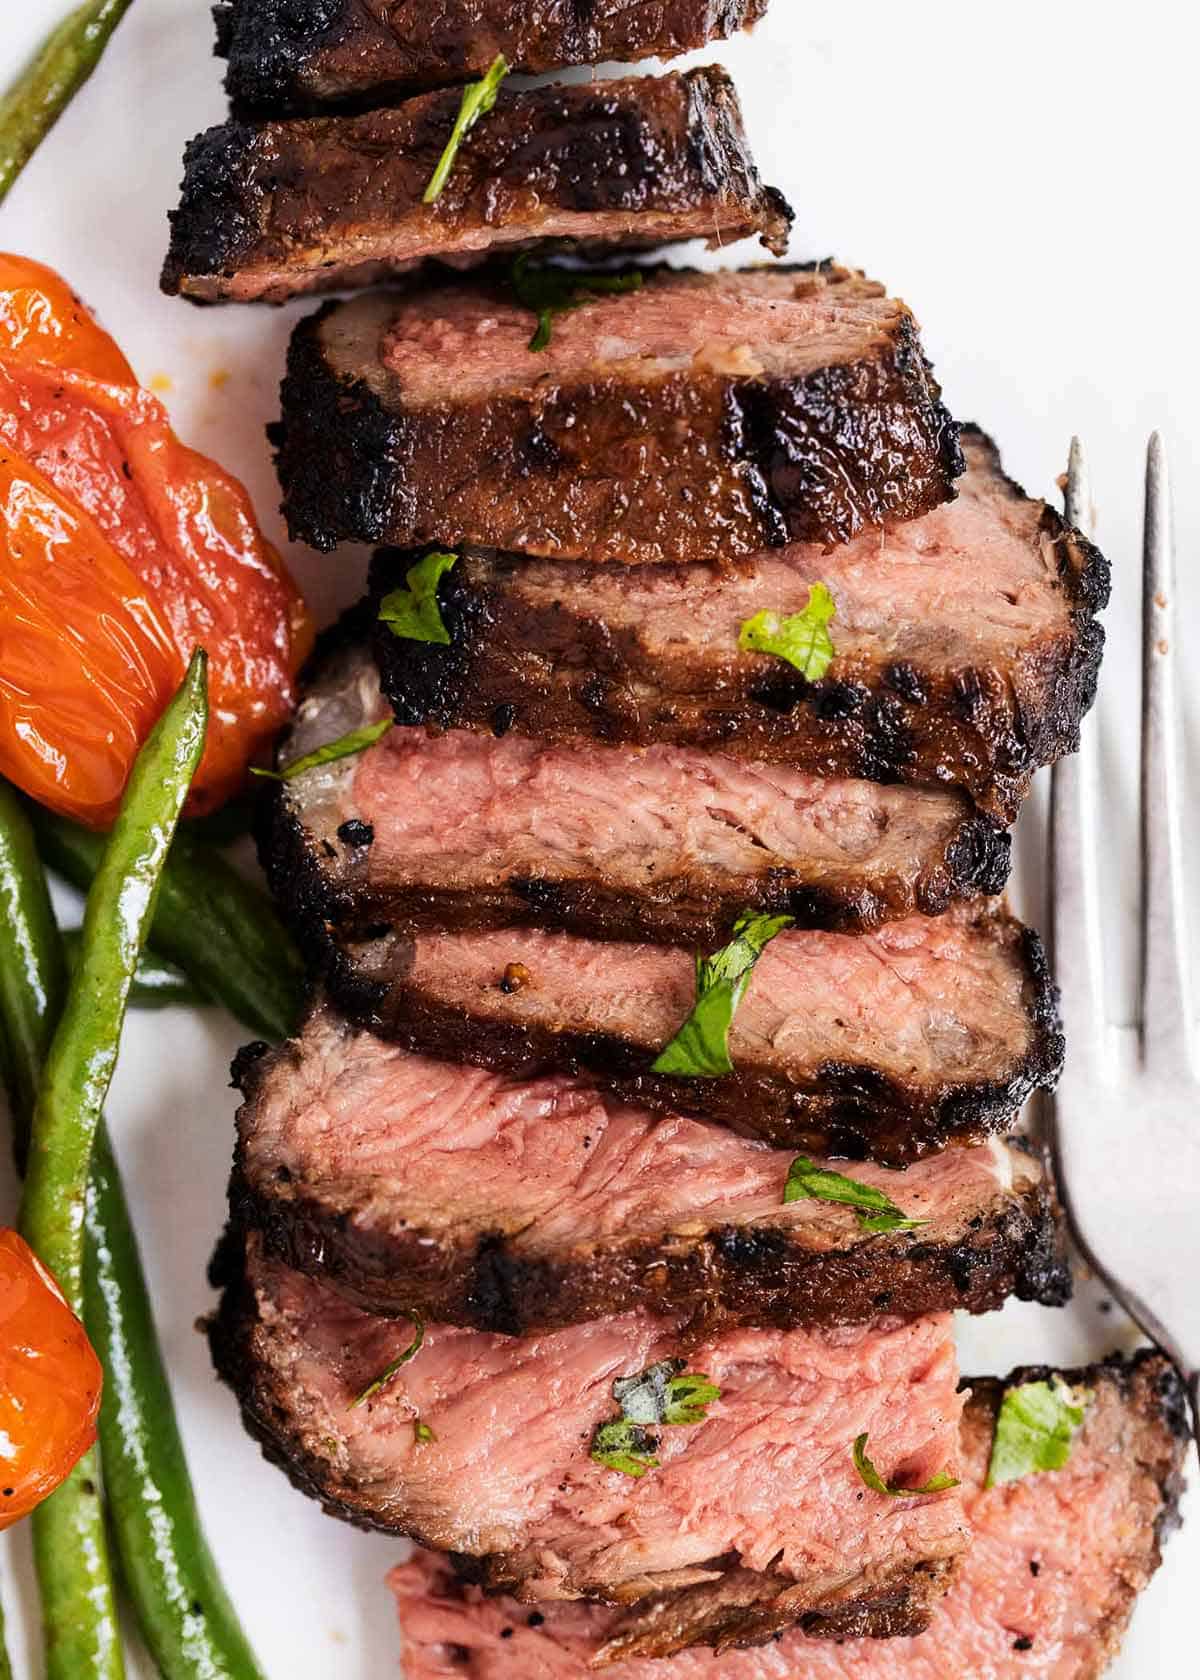 Sliced steak on a cutting board with grilled vegetables on the side. 